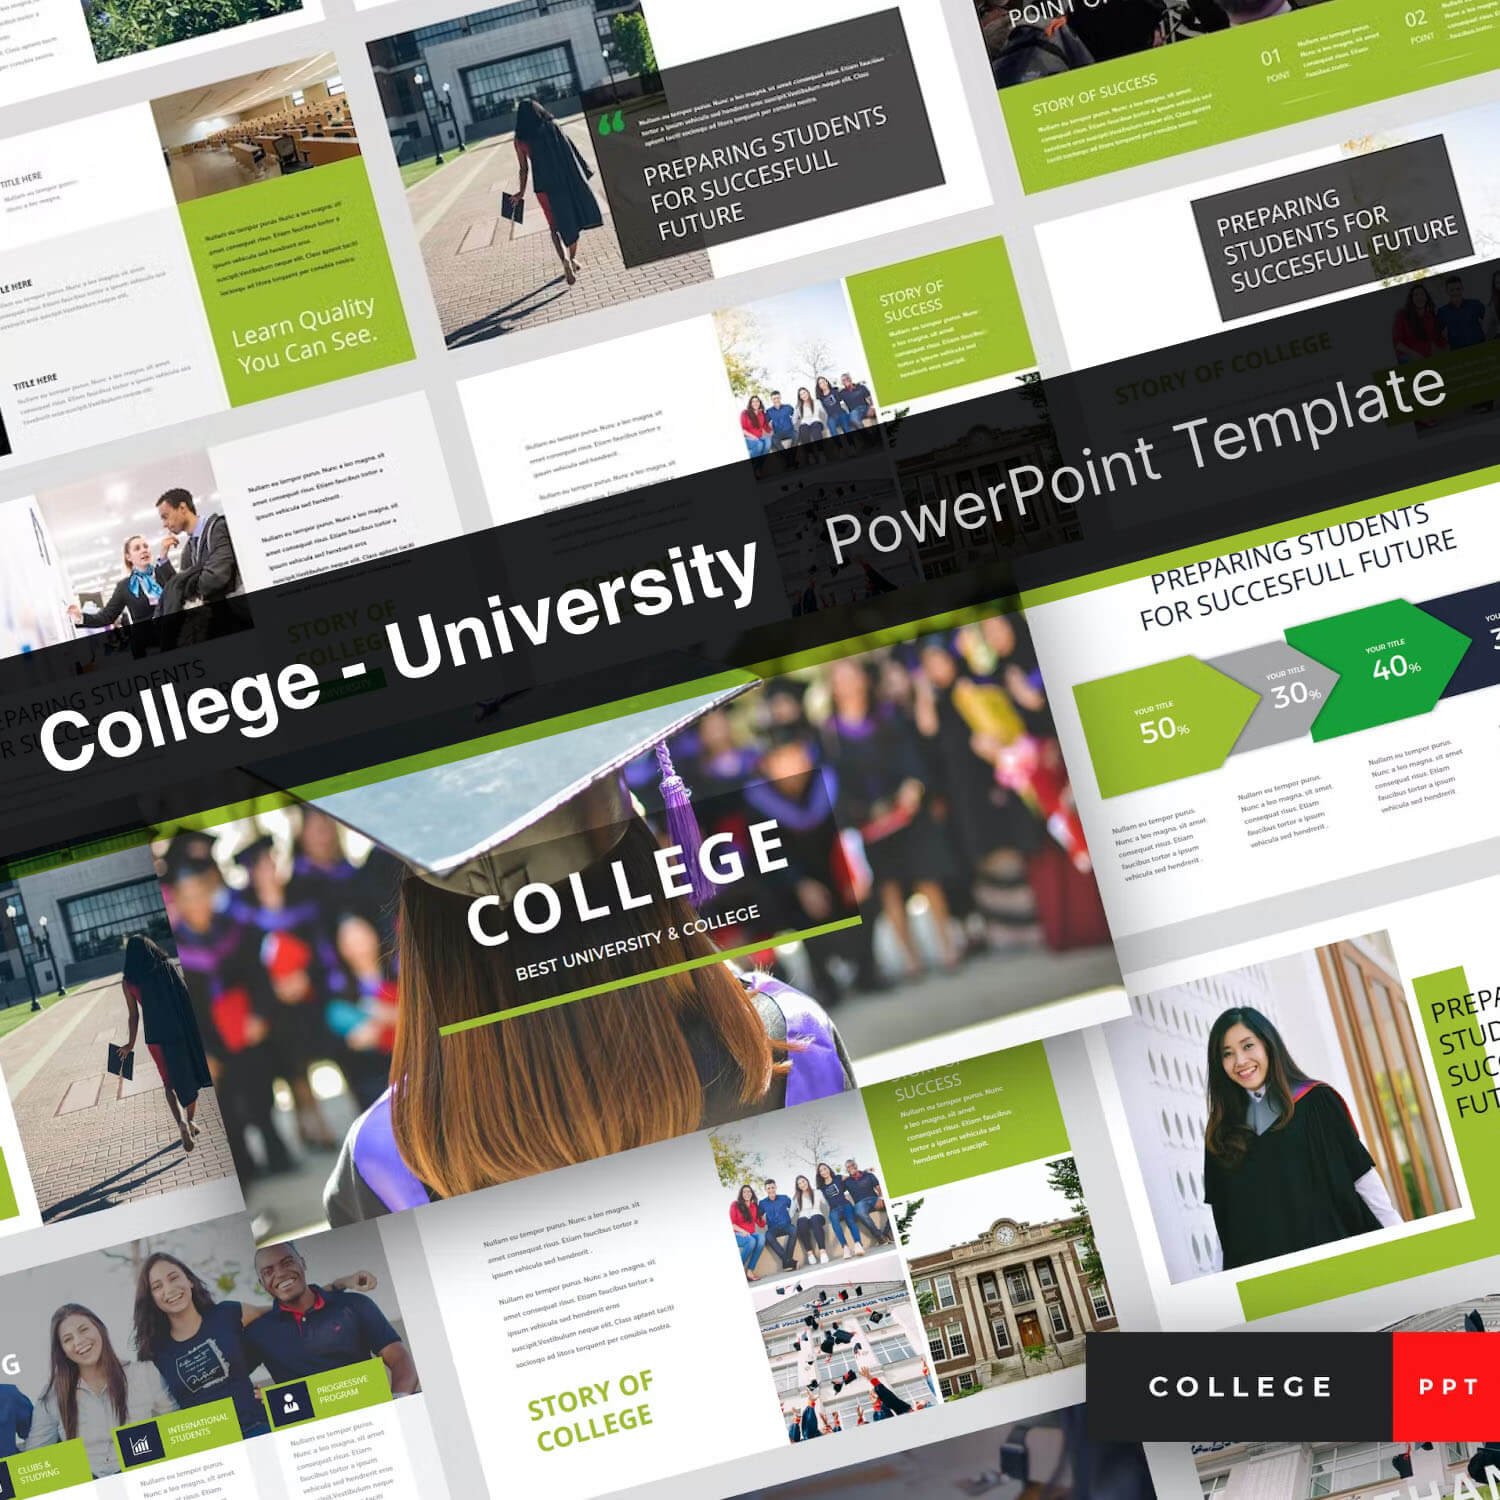 Introducing of College - University PowerPoint Template.